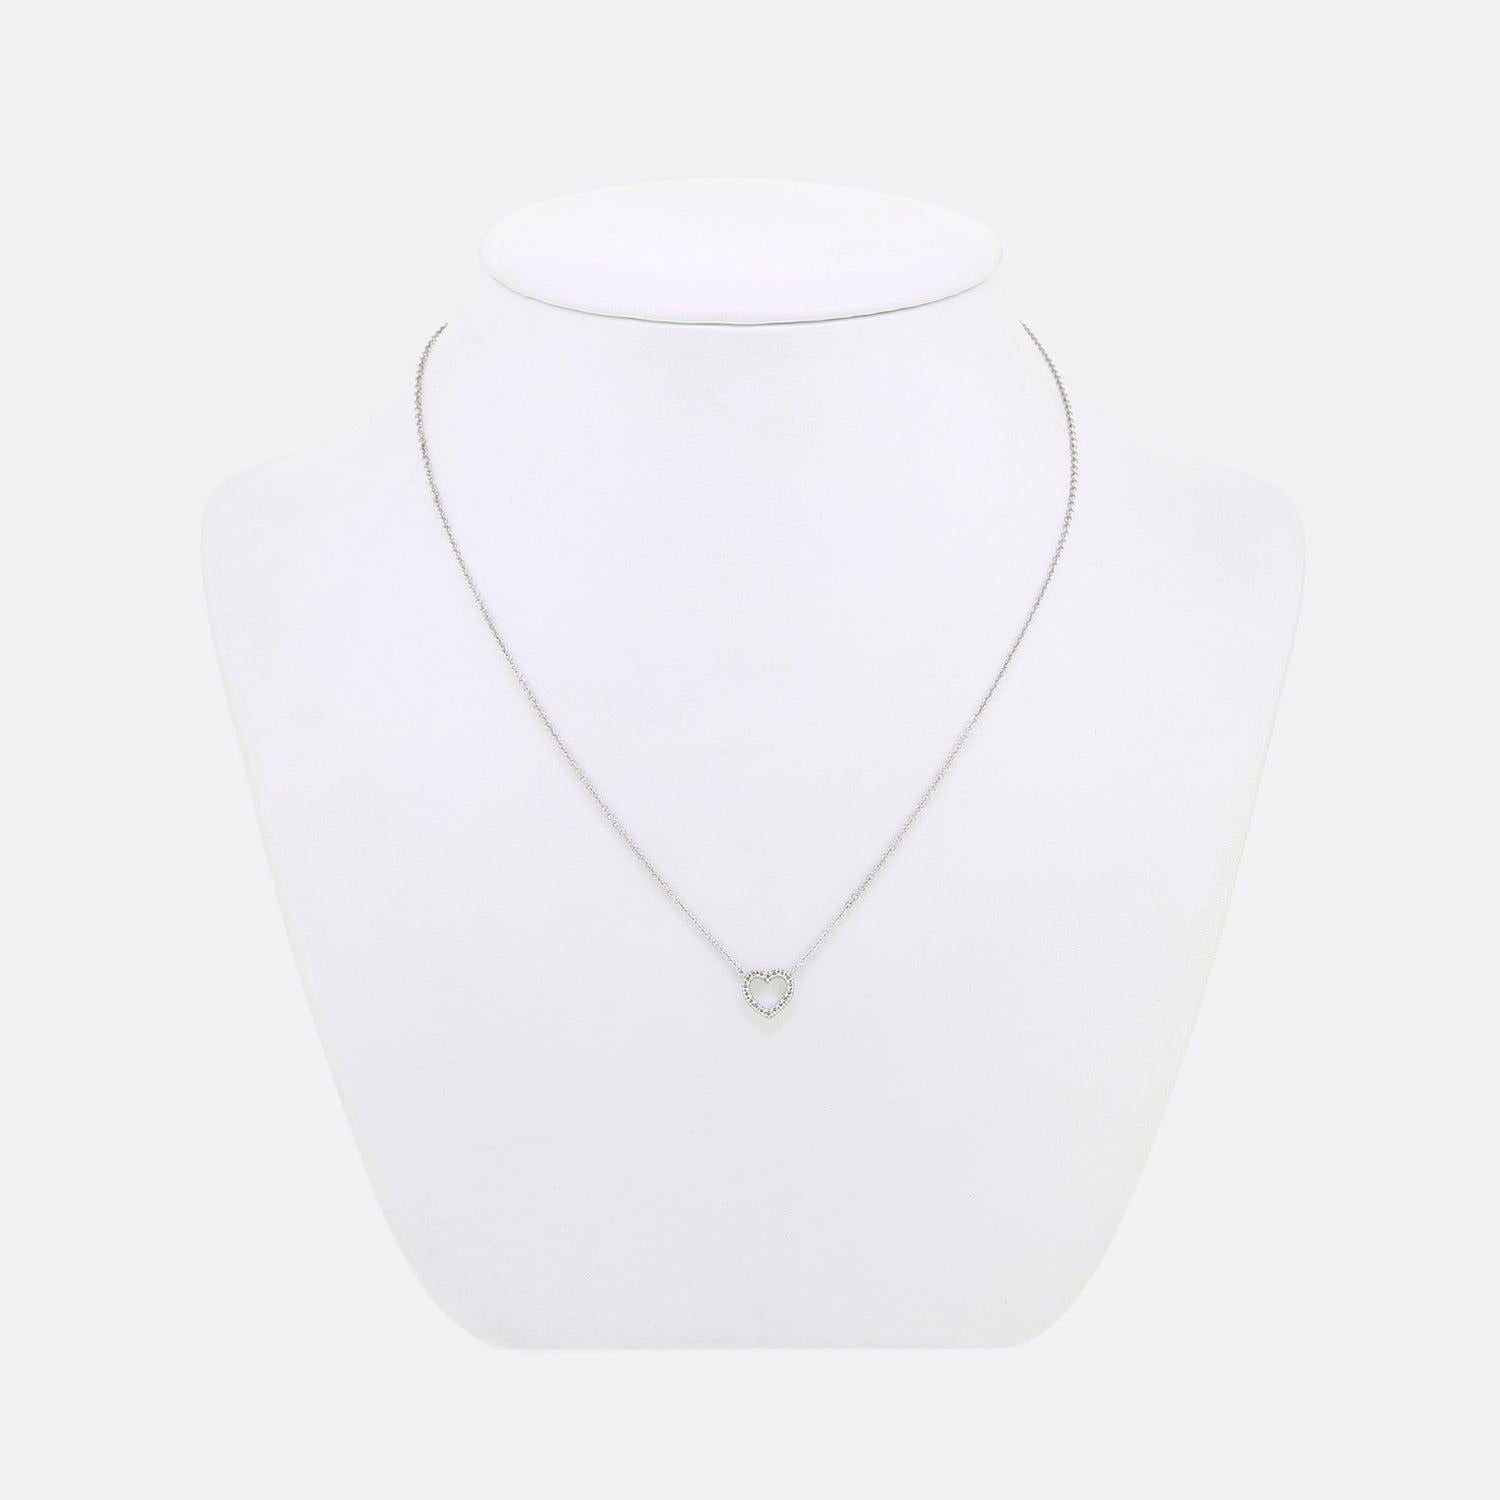 Here we have an 18ct white gold necklace from the iconic jewellery designer and retailer, Tiffany & Co. The necklace forms part of the metro collection and plays host to a small diamond set heart.

Condition: Used (Excellent)
Weight: 1.7 grams
Chain